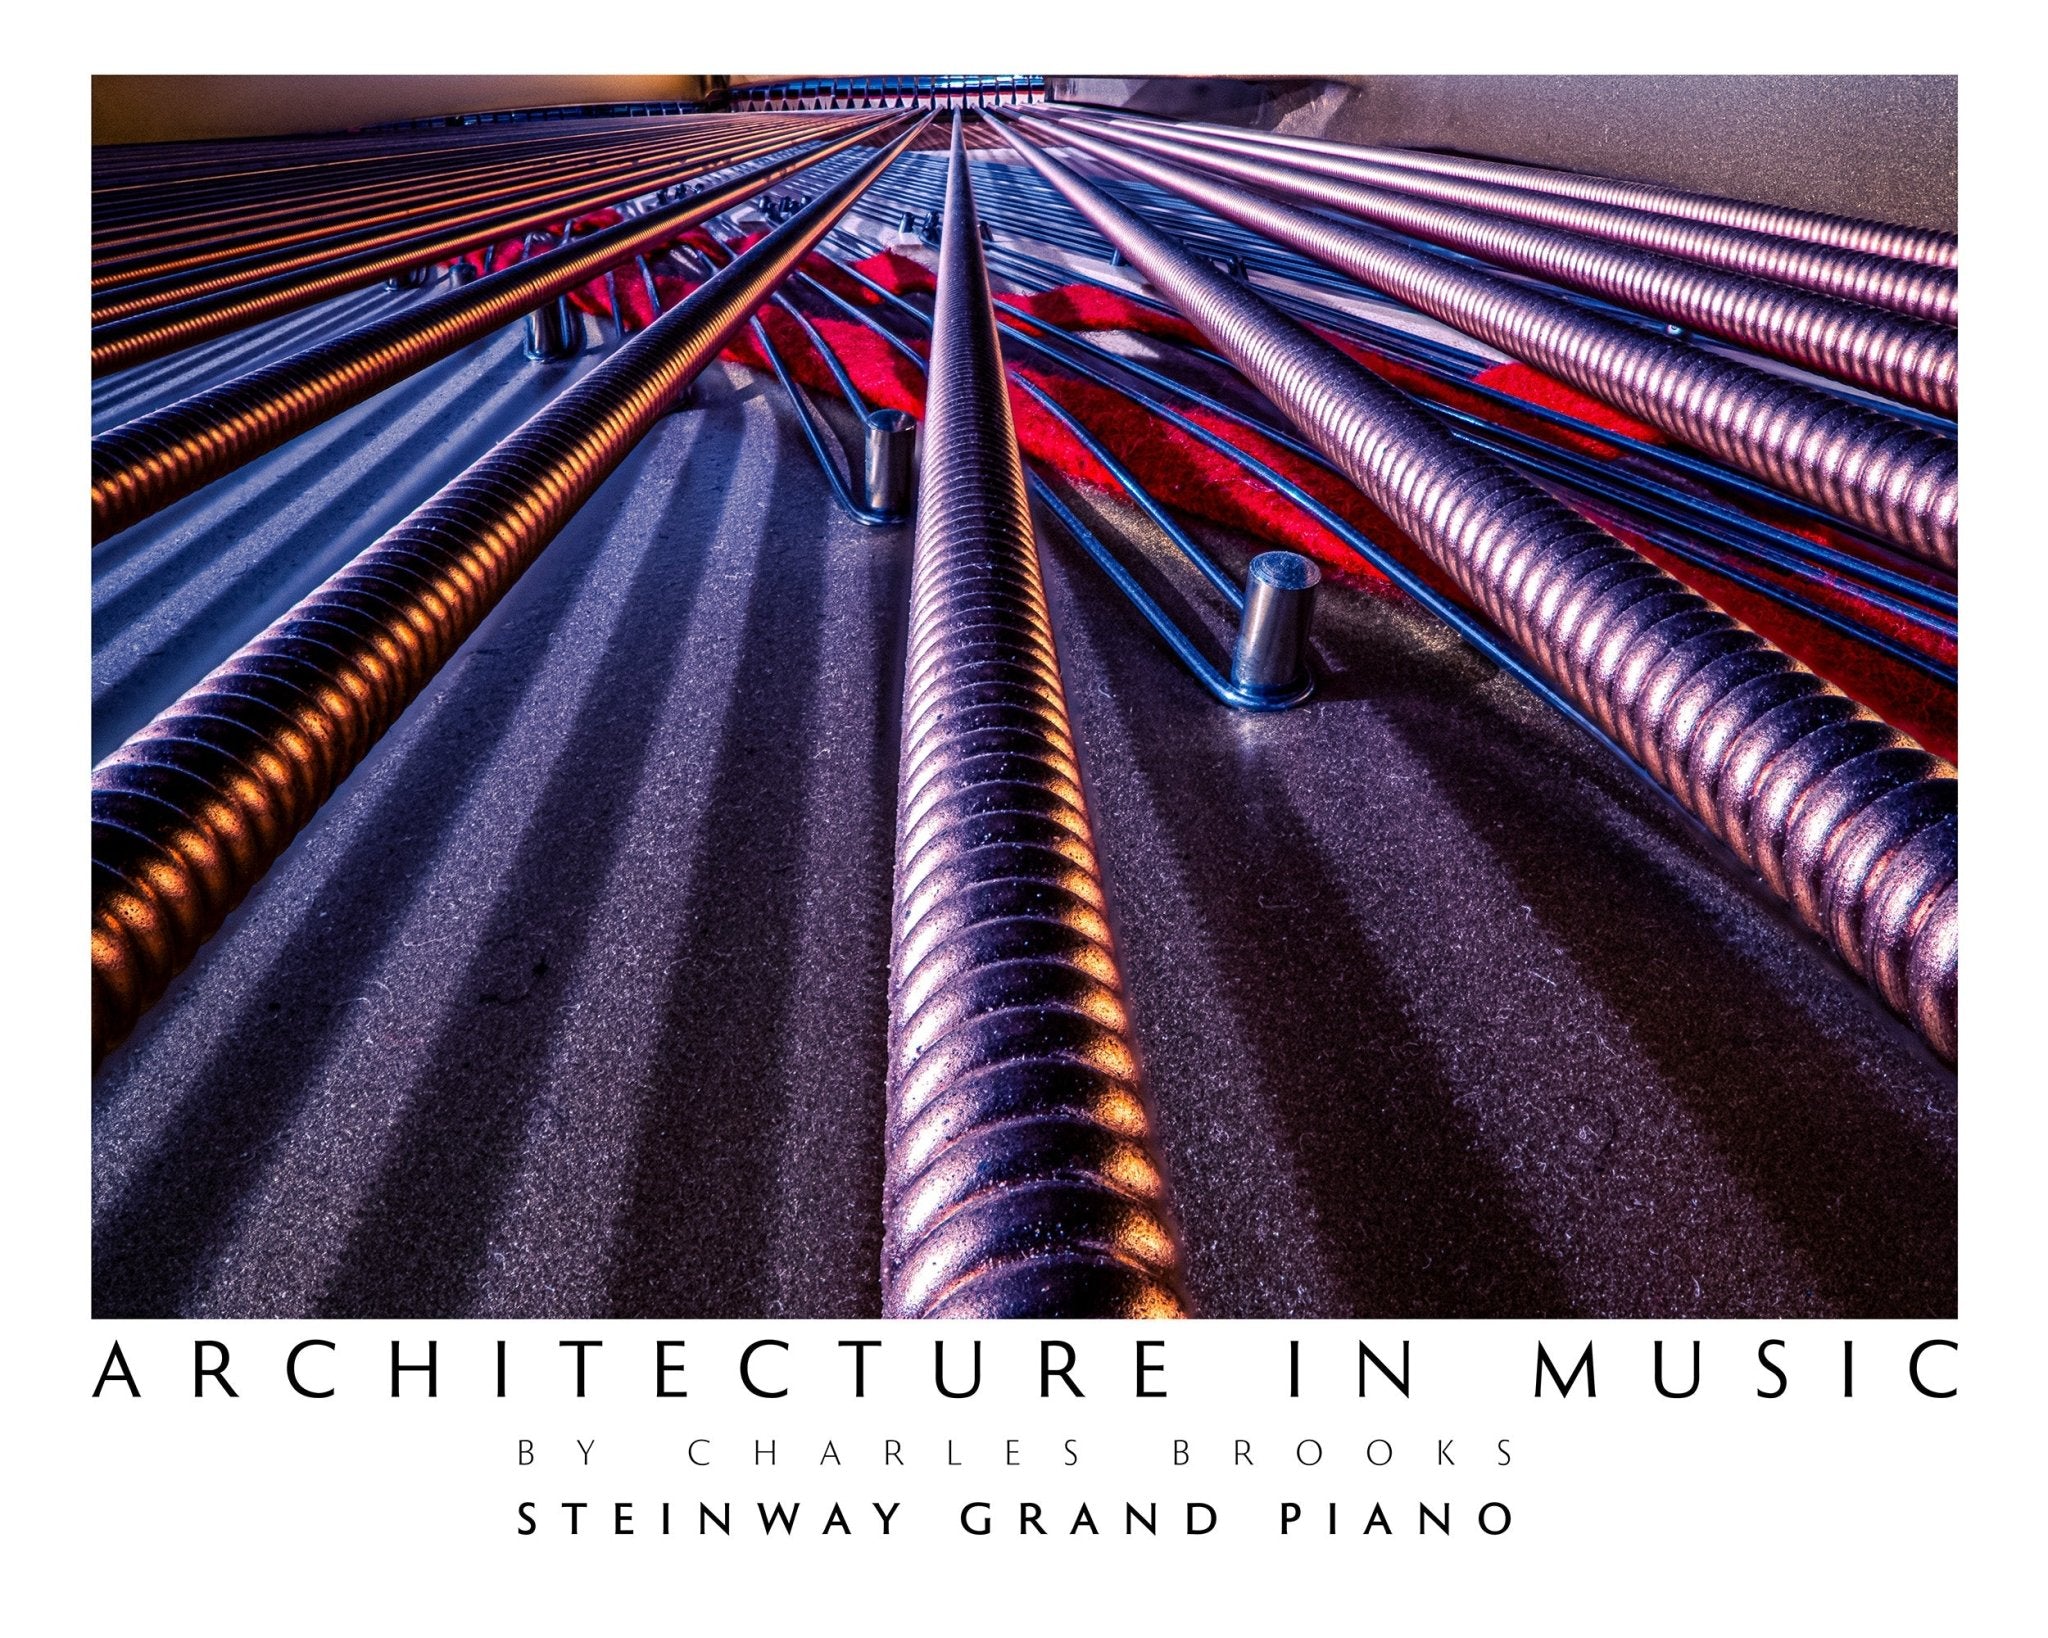 Photo of The Exquisite Architecture of Steinway, Part 3. High Quality Poster. - Giclée Poster Print - Architecture In Music